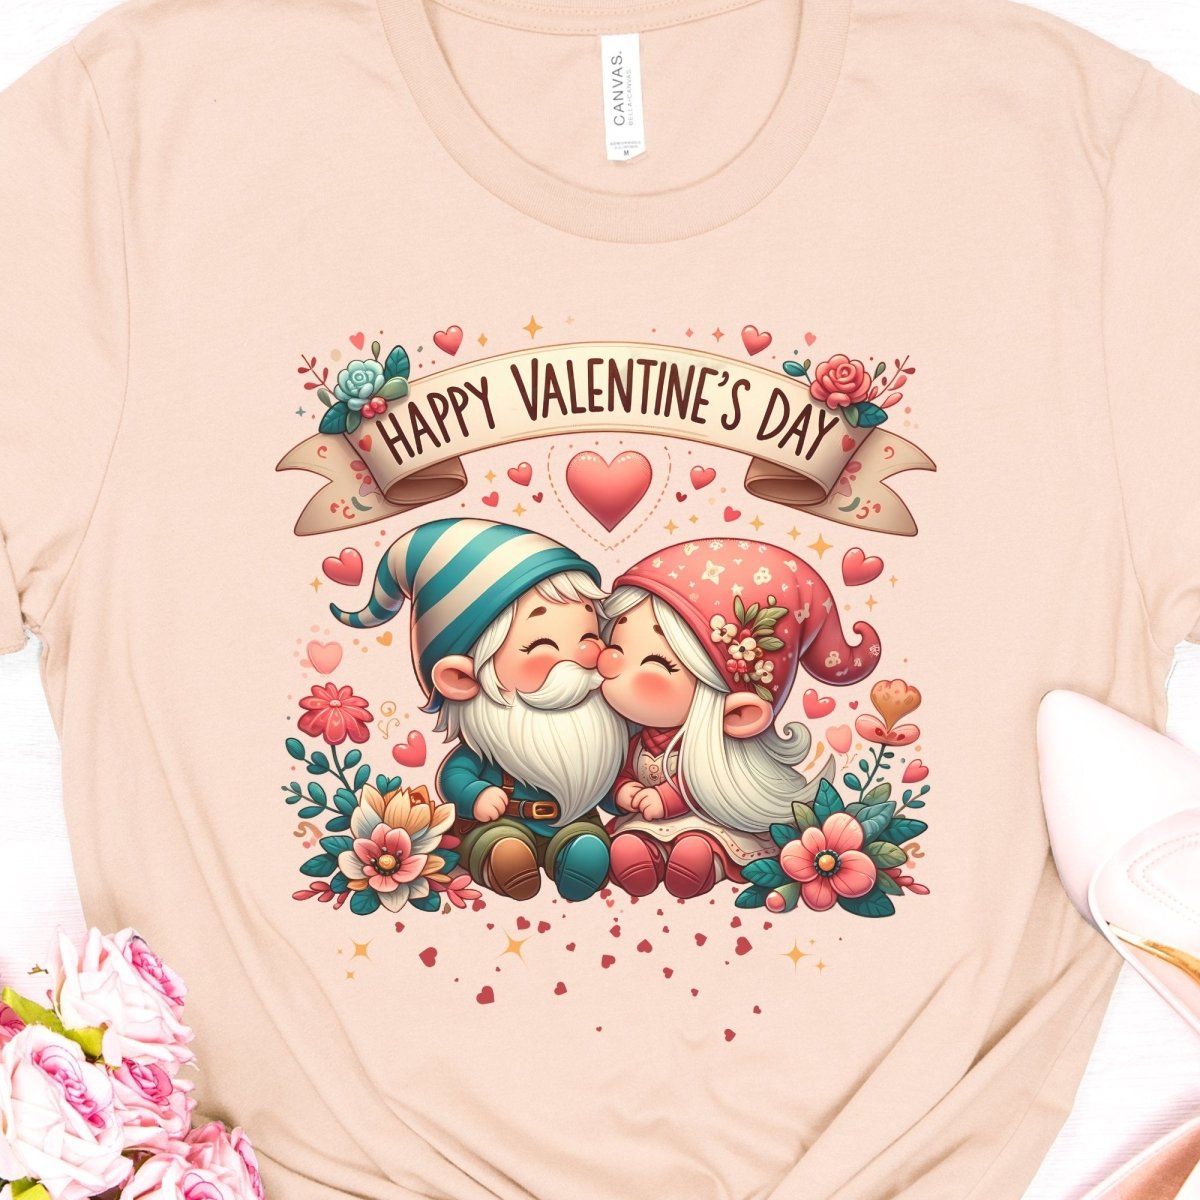 Cute Gnome Valentine T-Shirt High Quality Funny Valentines Day Shirt Love Gift for Her Love Tee Cute Couple Anniversary Shirt Gnomie Design - Everything Pixel